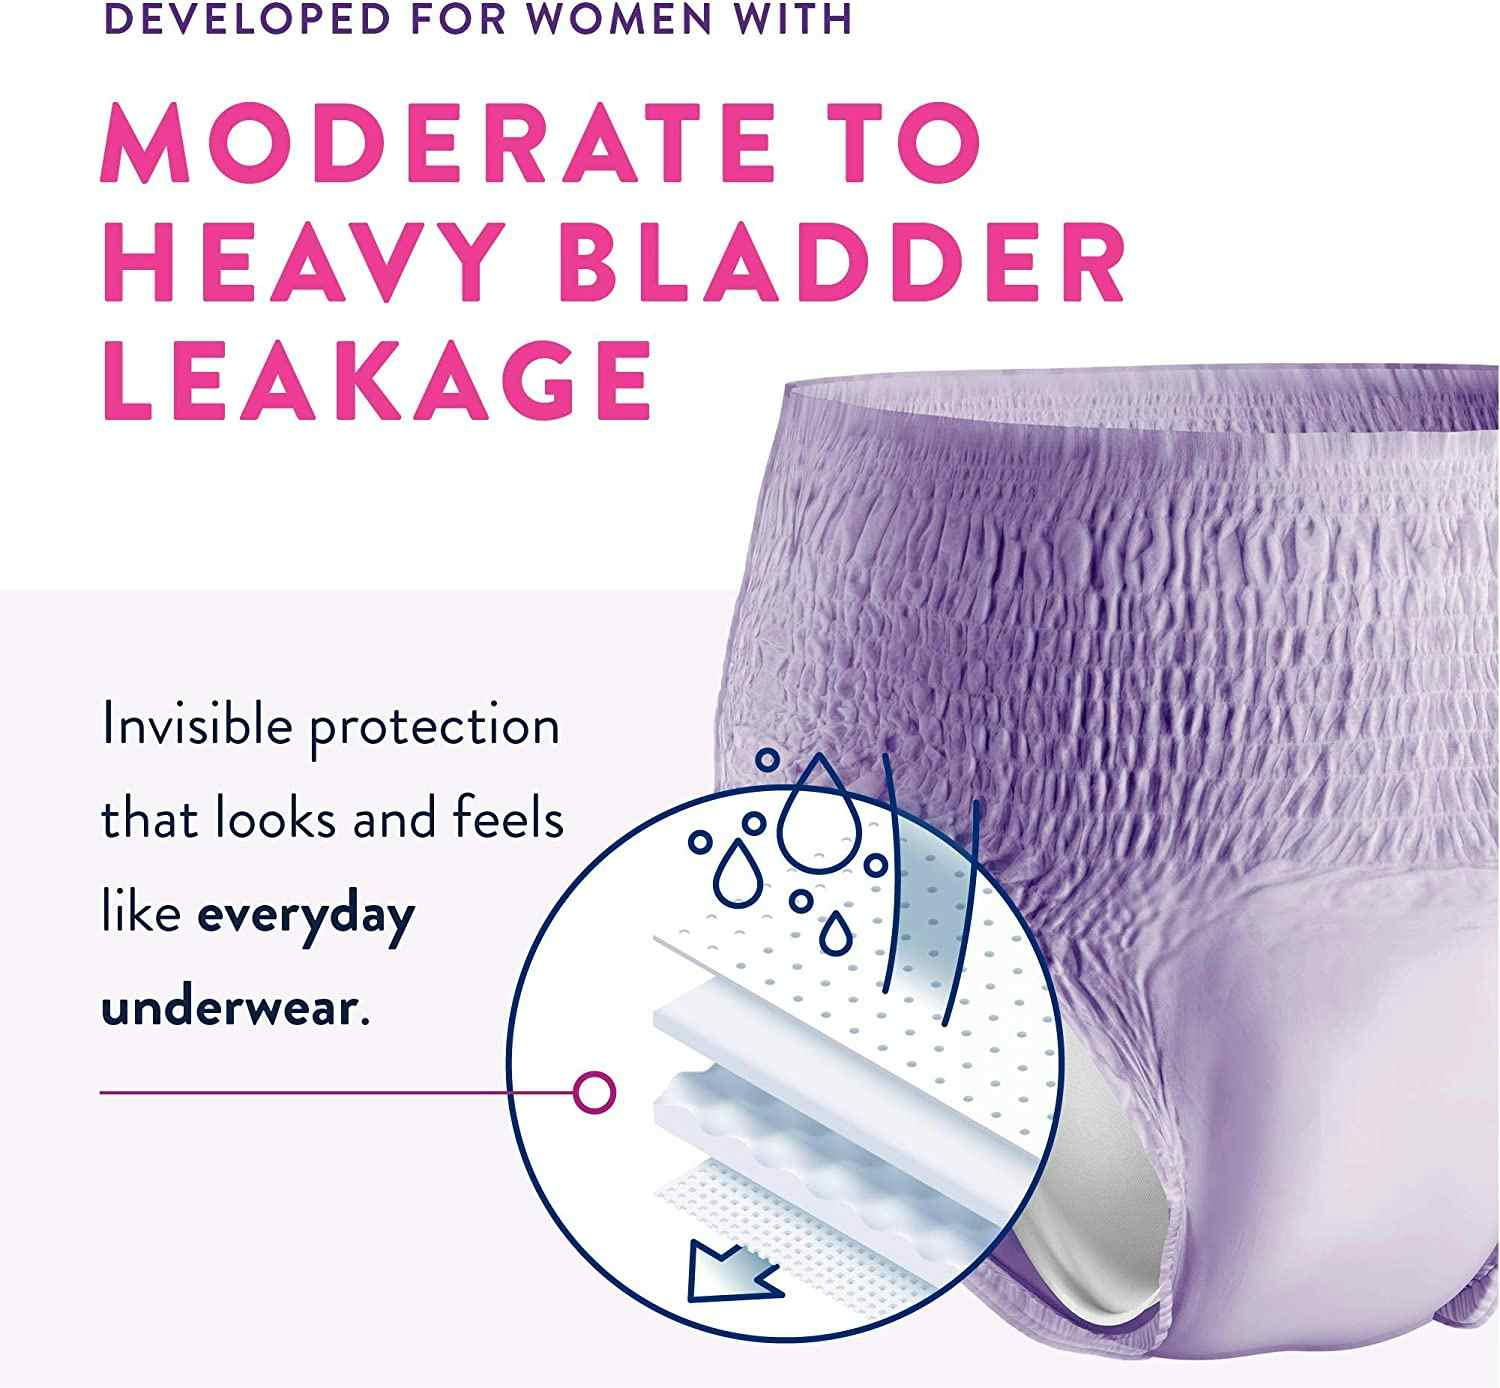 Prevail Daily Pull-Up Underwear For Women, Maximum, Moderate to Heavy Bladder Leakage